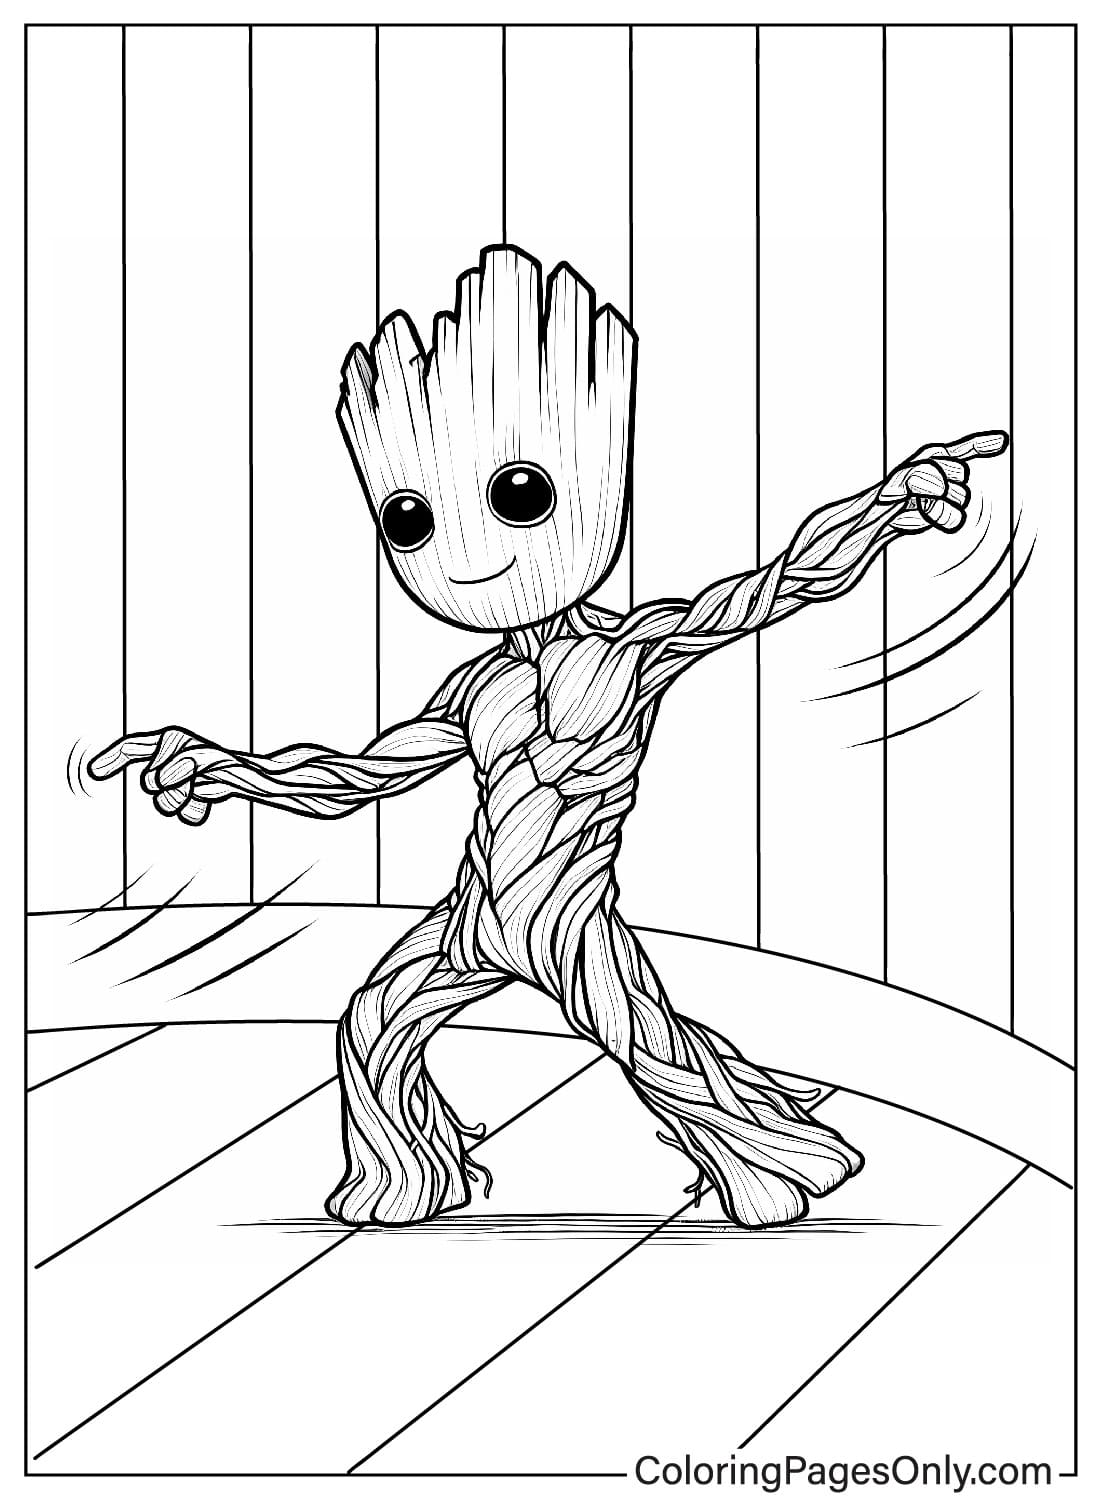 Groot Coloring Sheet for Kids from Groot